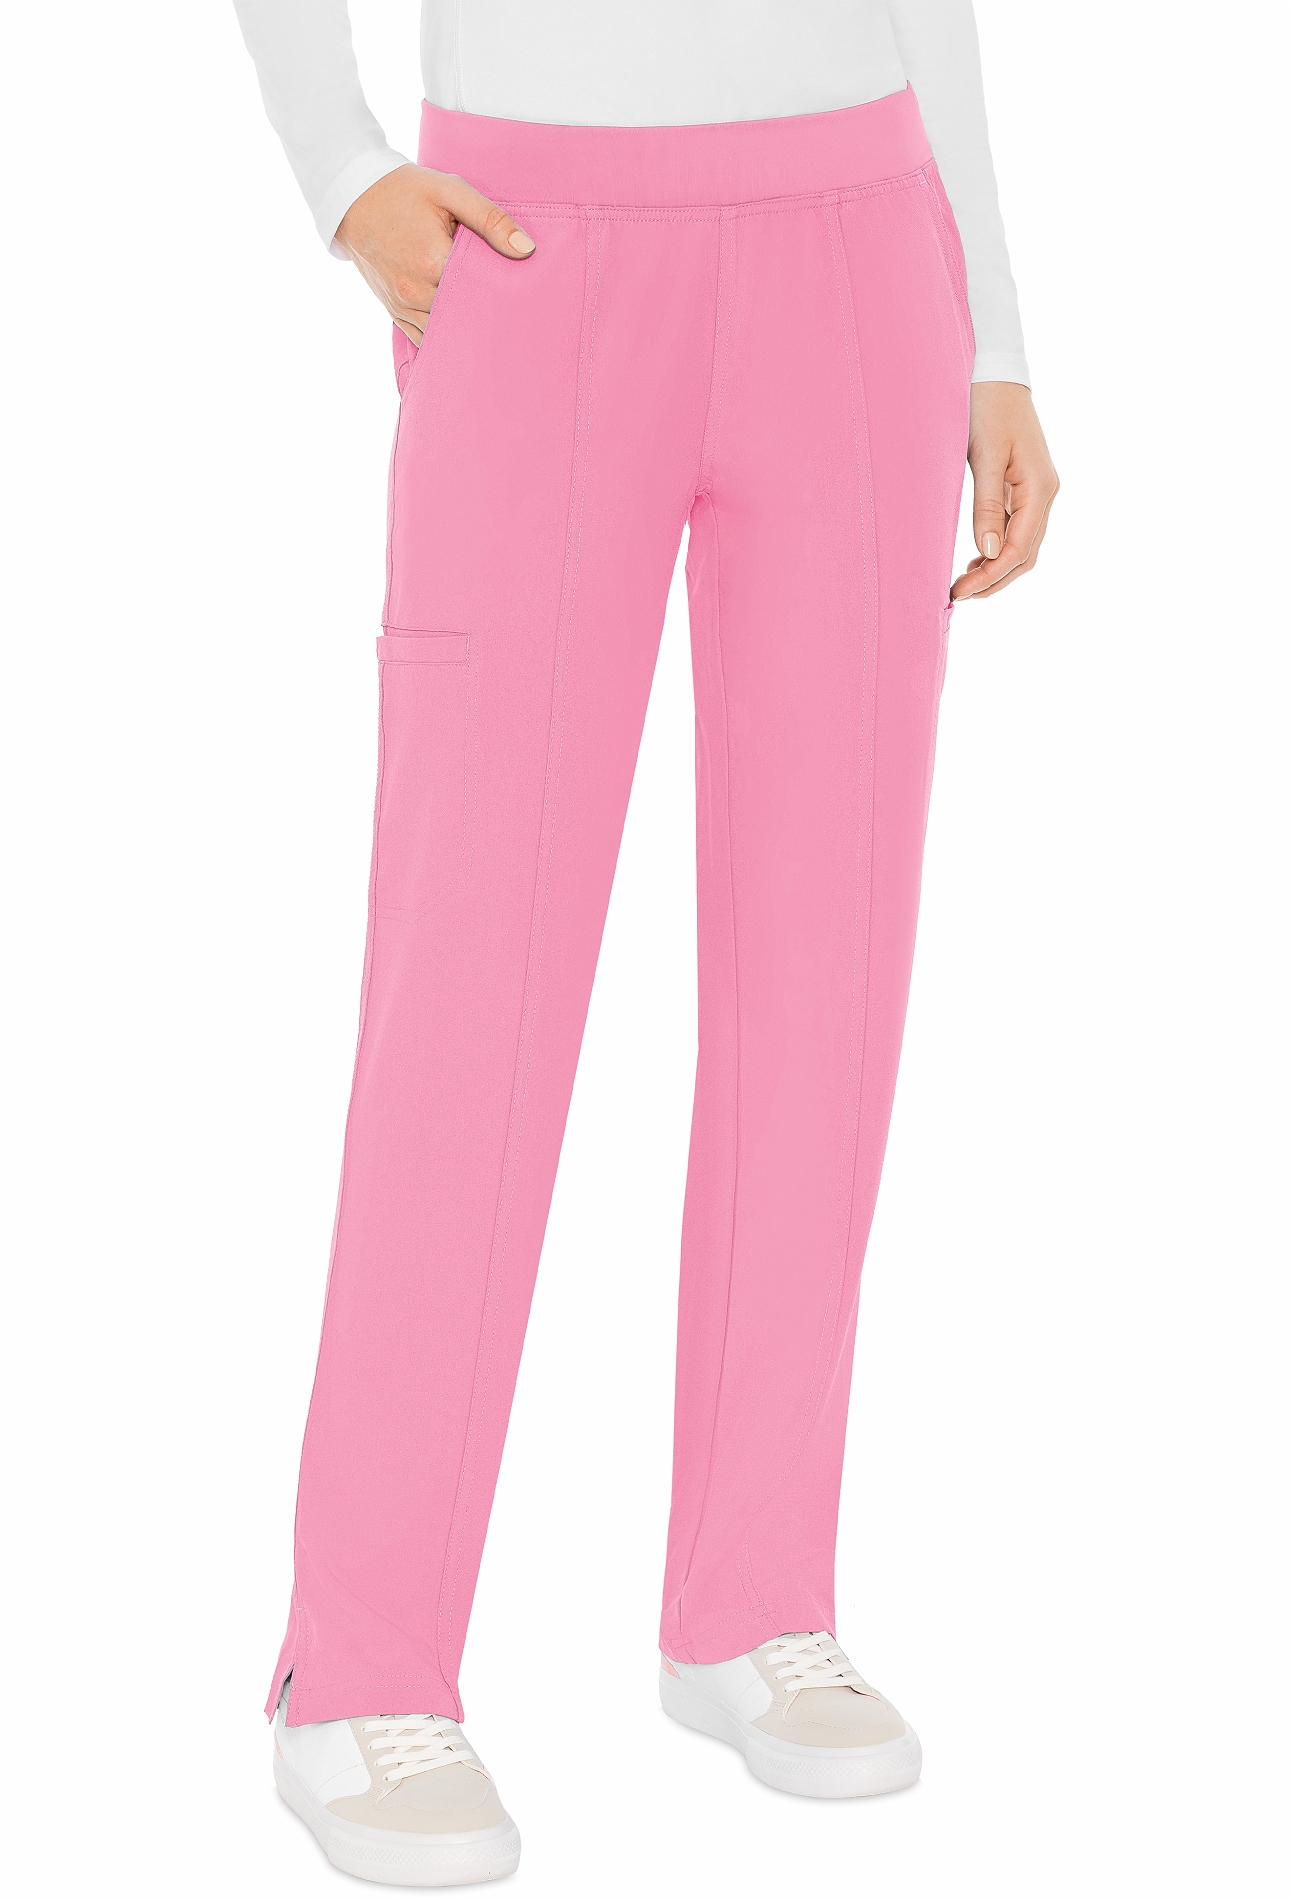 Med Couture Energy Women's Yoga Comfort Cargo Paige Pant-8744